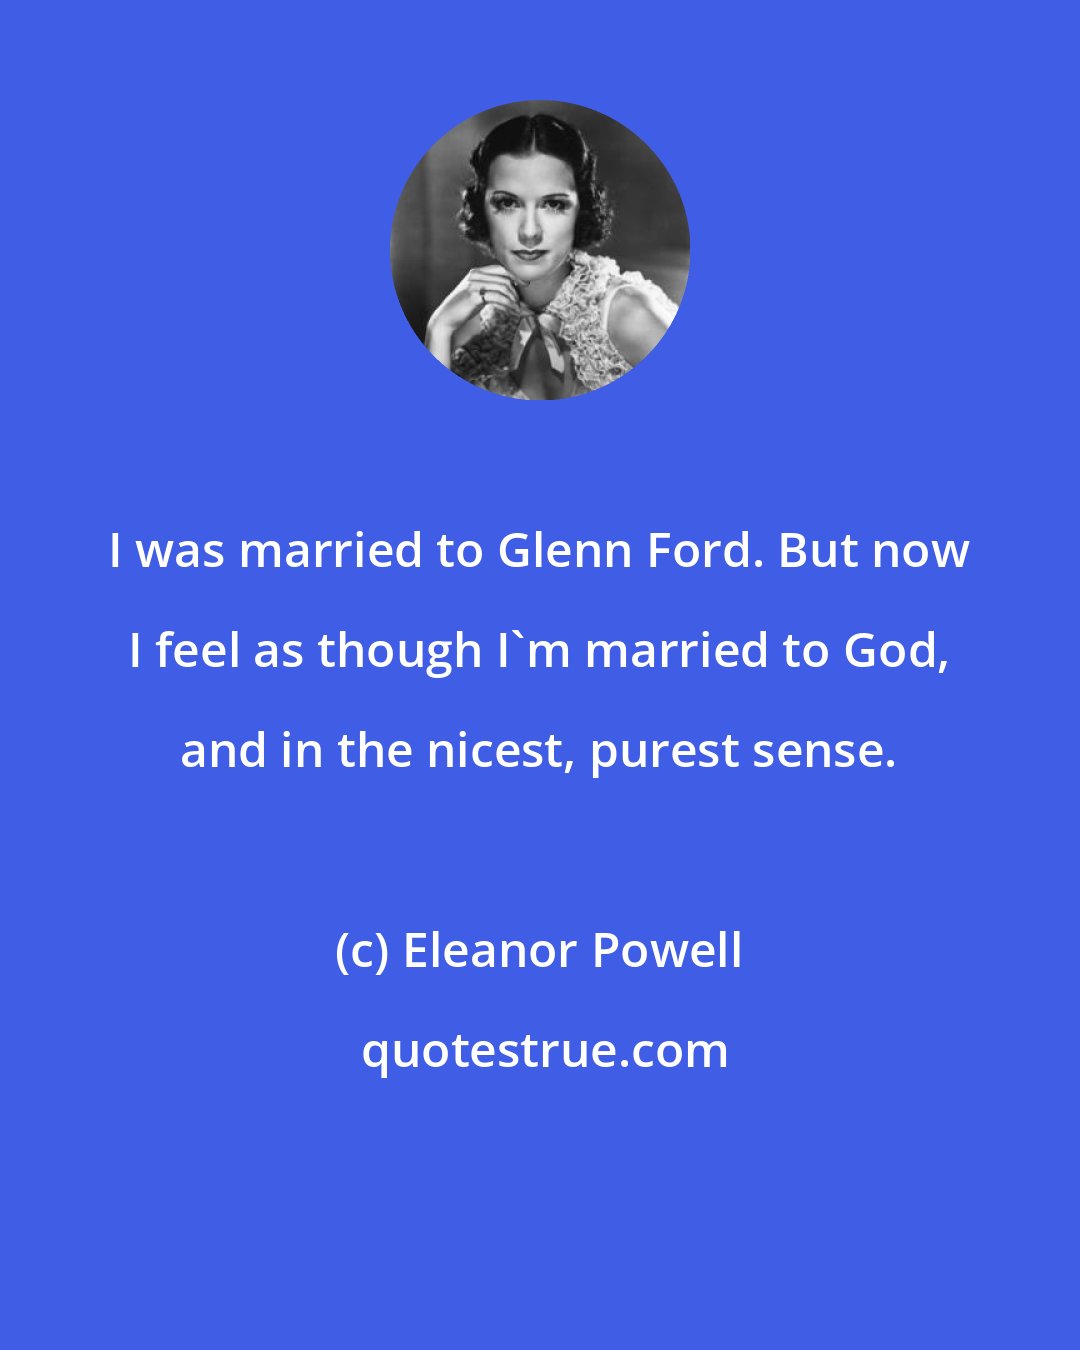 Eleanor Powell: I was married to Glenn Ford. But now I feel as though I'm married to God, and in the nicest, purest sense.